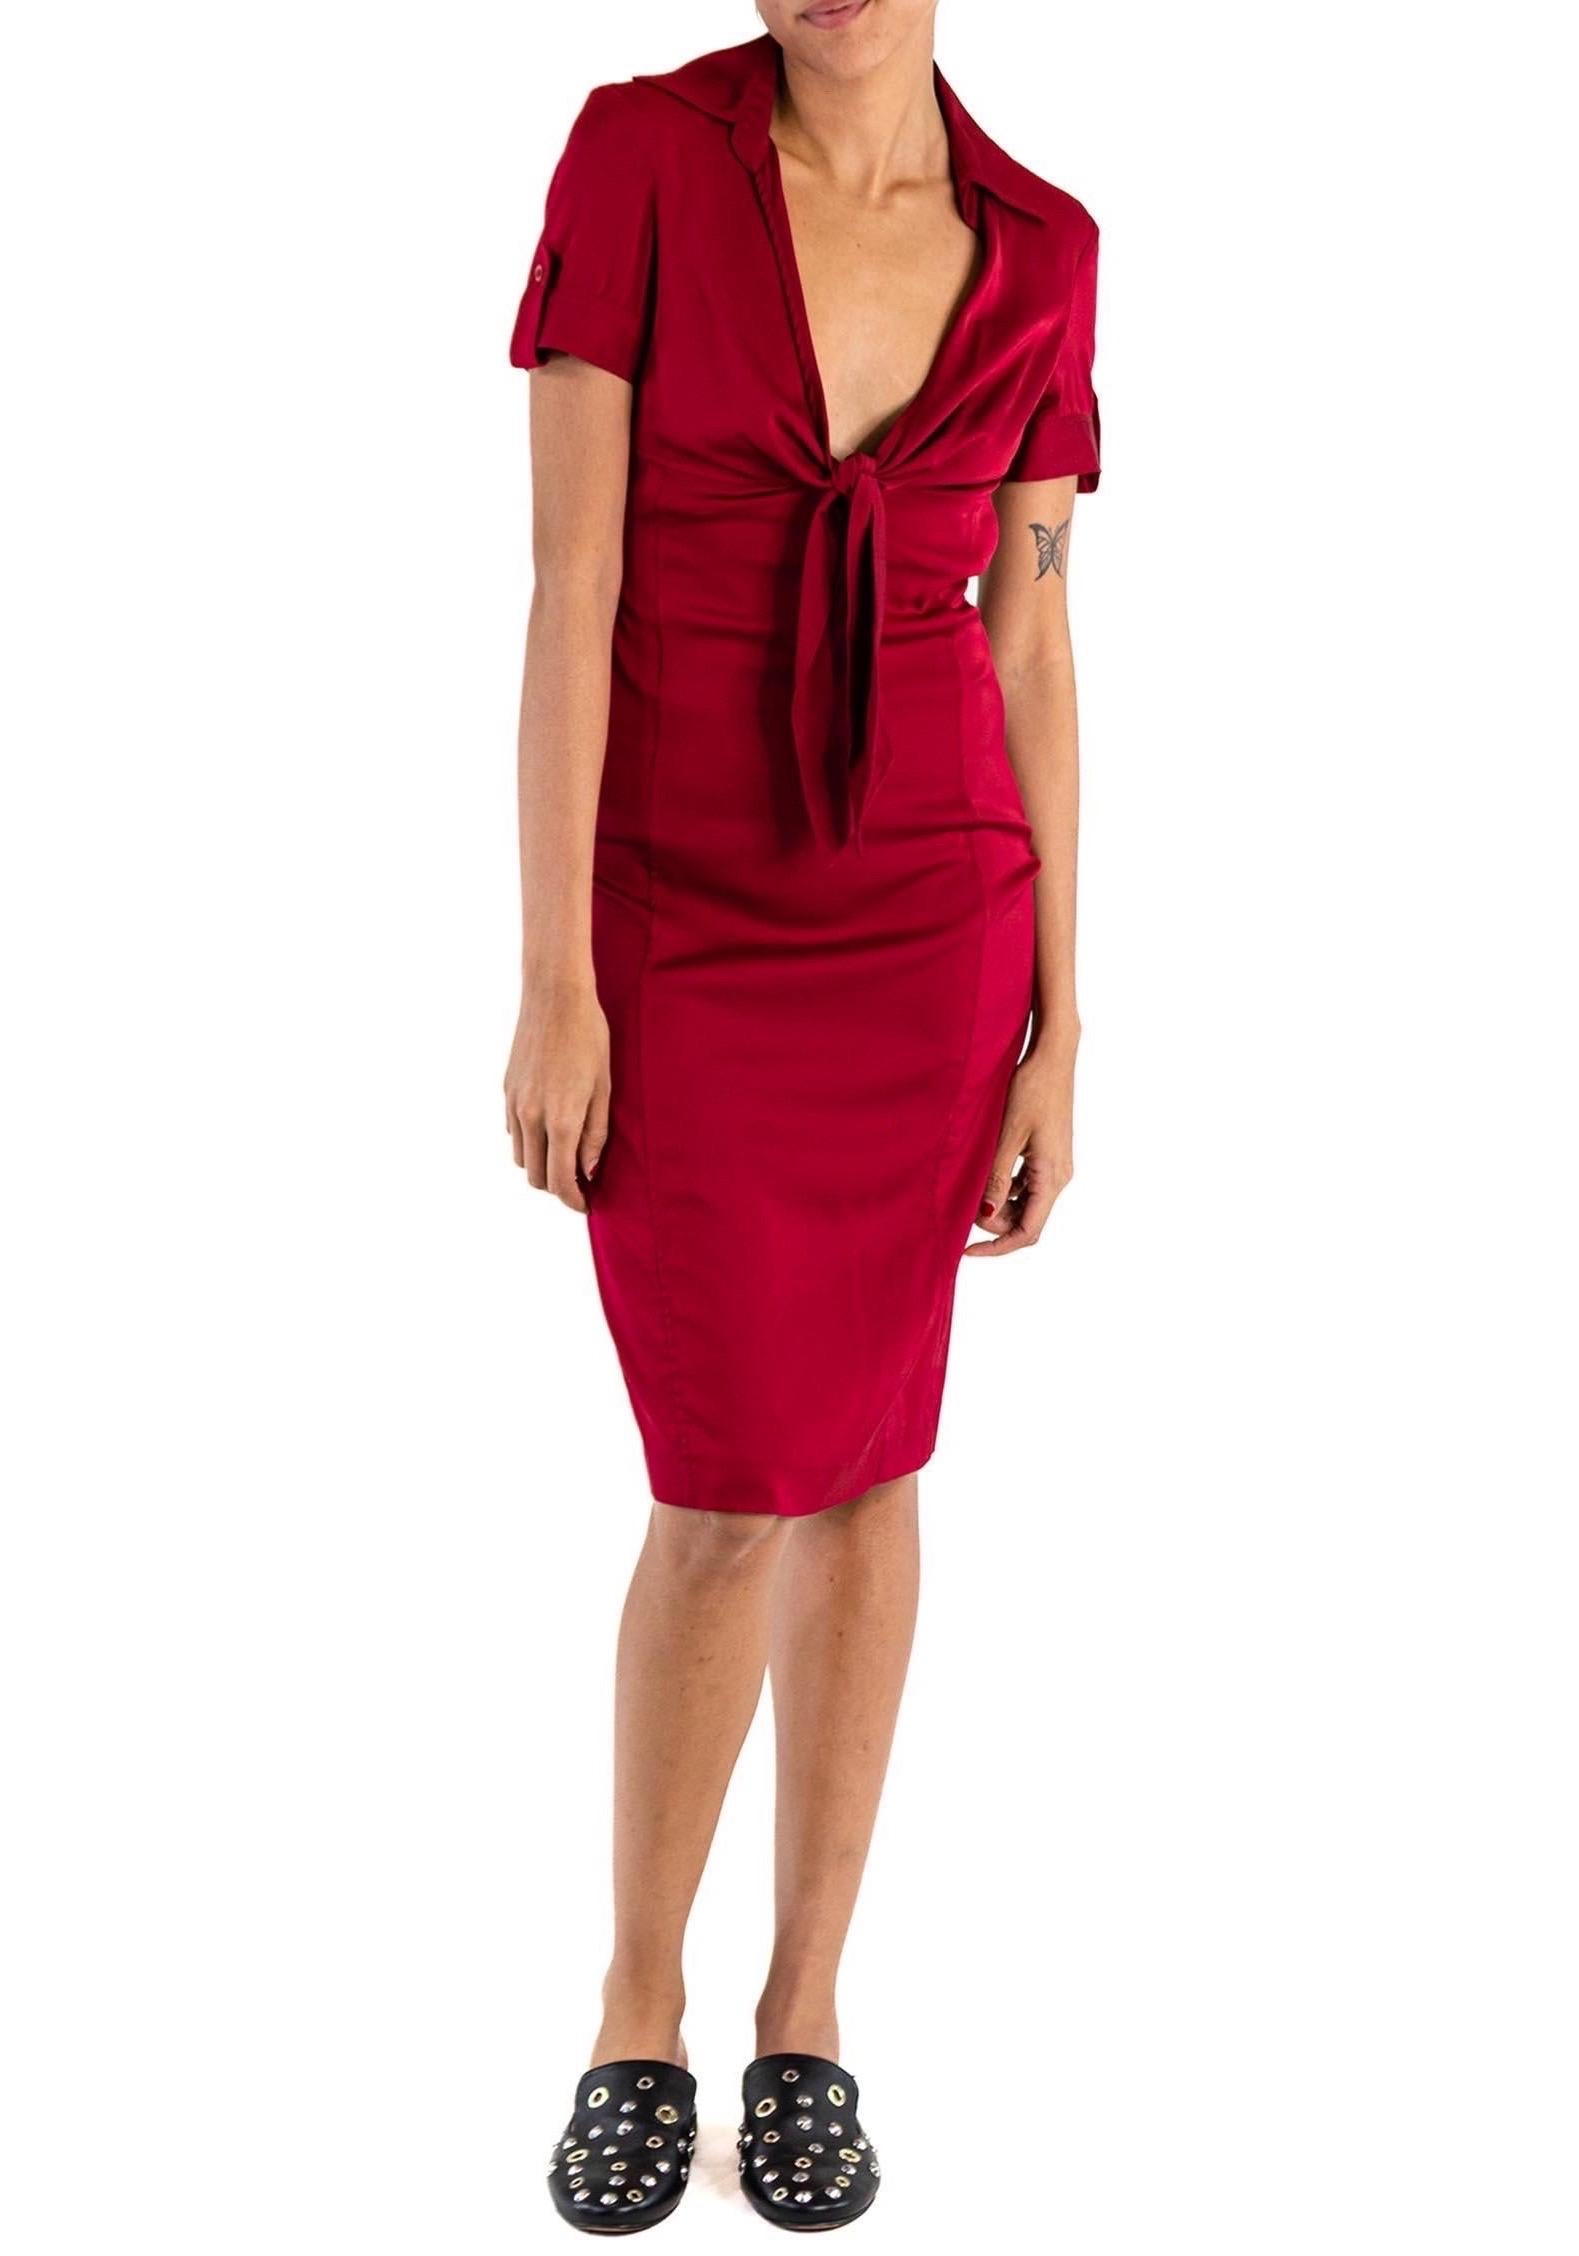 2000S GUCCI Burgundy Silk & Spandex Charmeuse Tie Front Dress For Sale 3